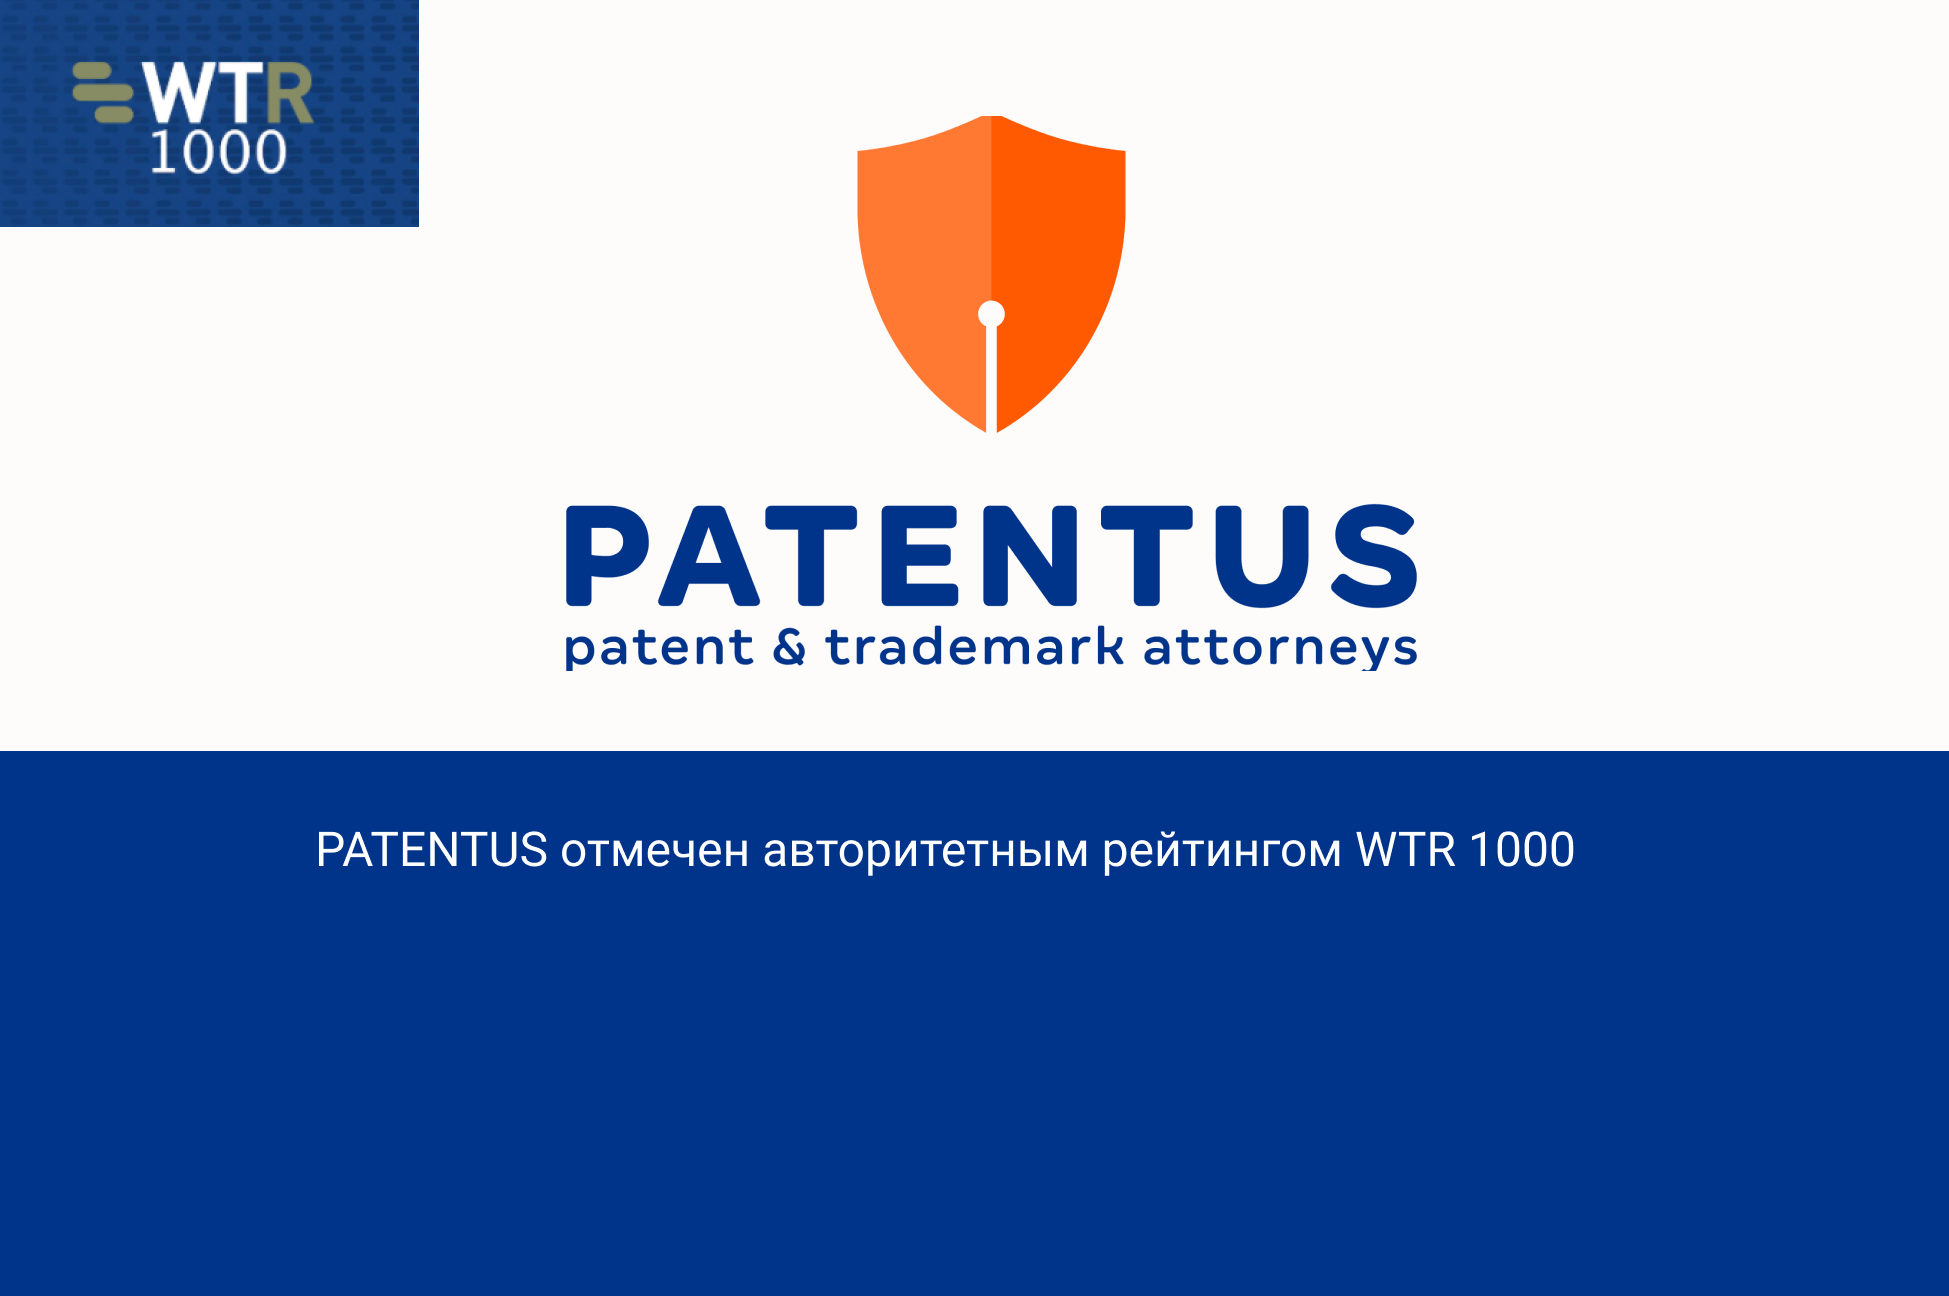 PATENTUS is ranked by World Trademark Review 1000